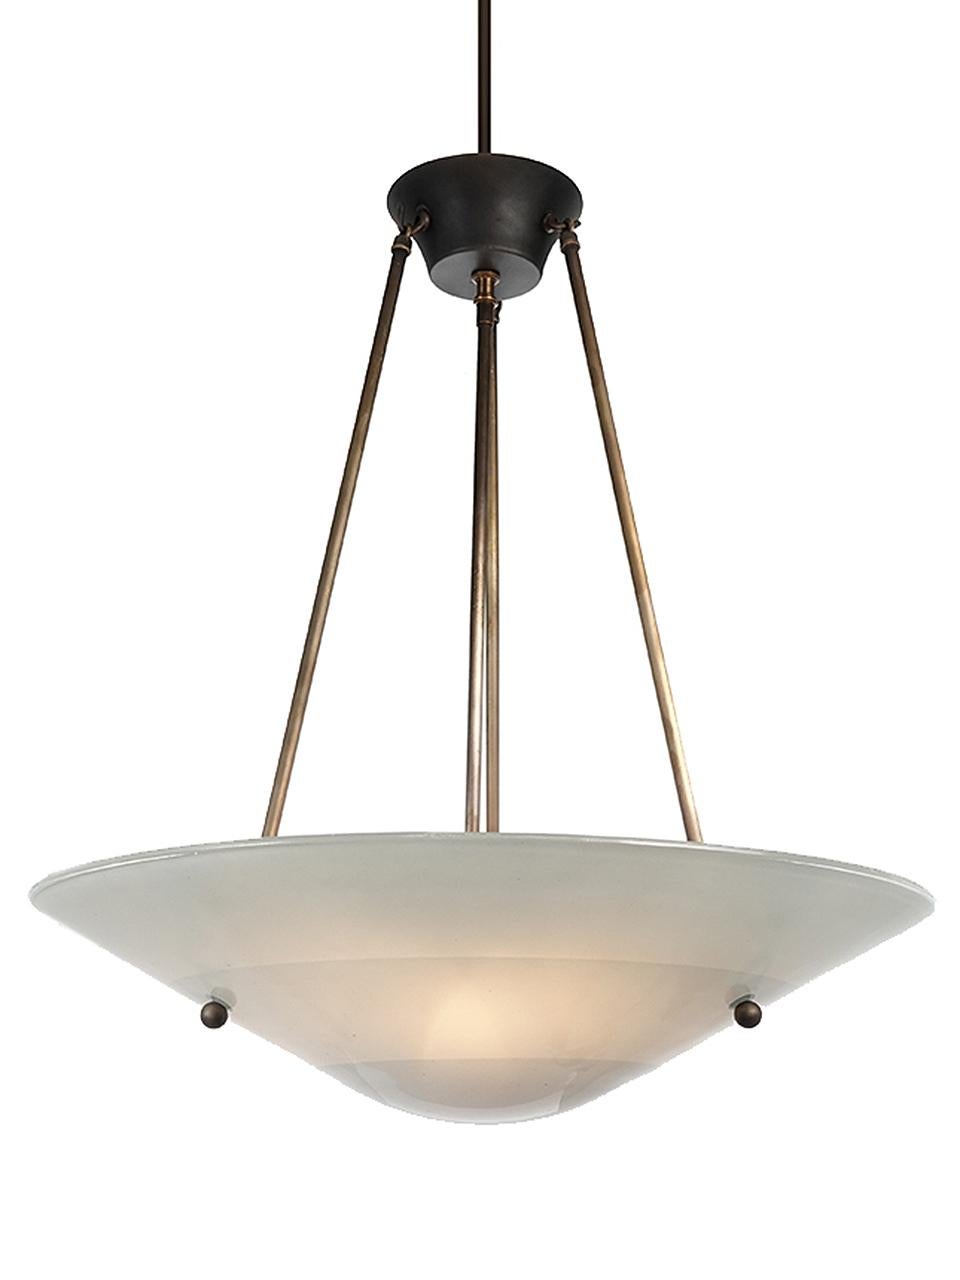 20th Century Mid-Century Modern Conical Glass Chandelier For Sale